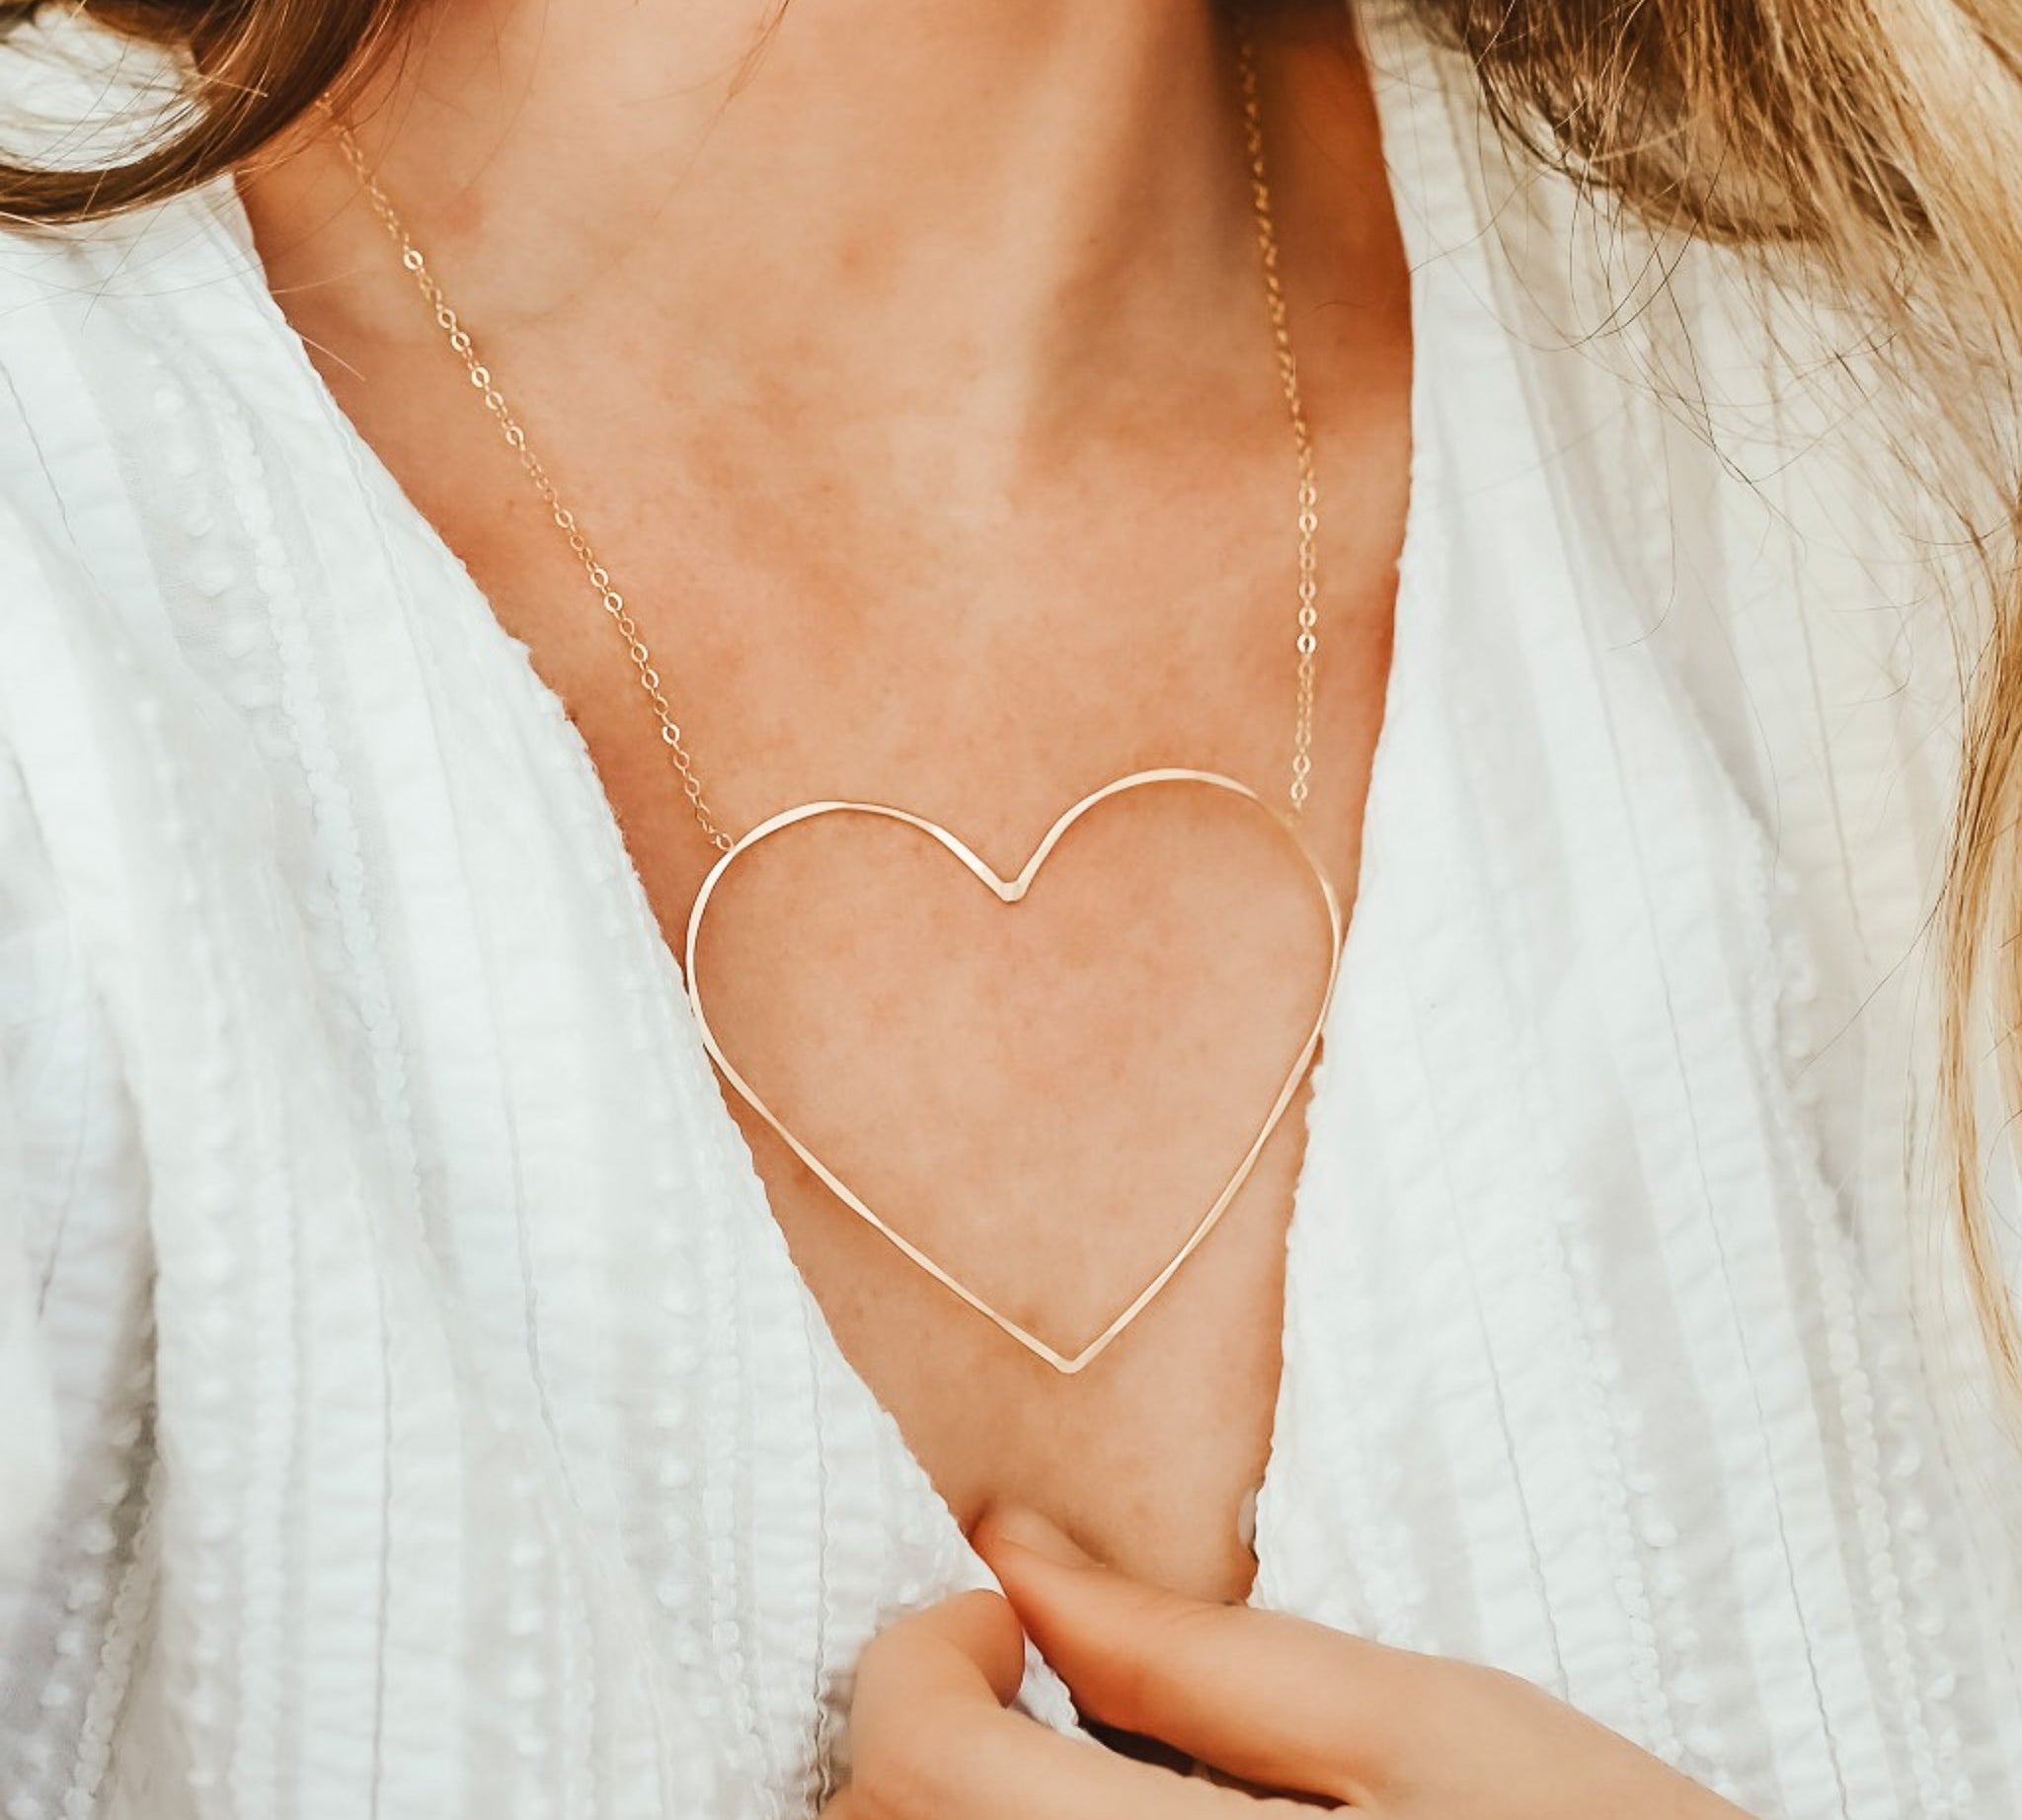 Heart of Gold Necklace, shown on model, featured image